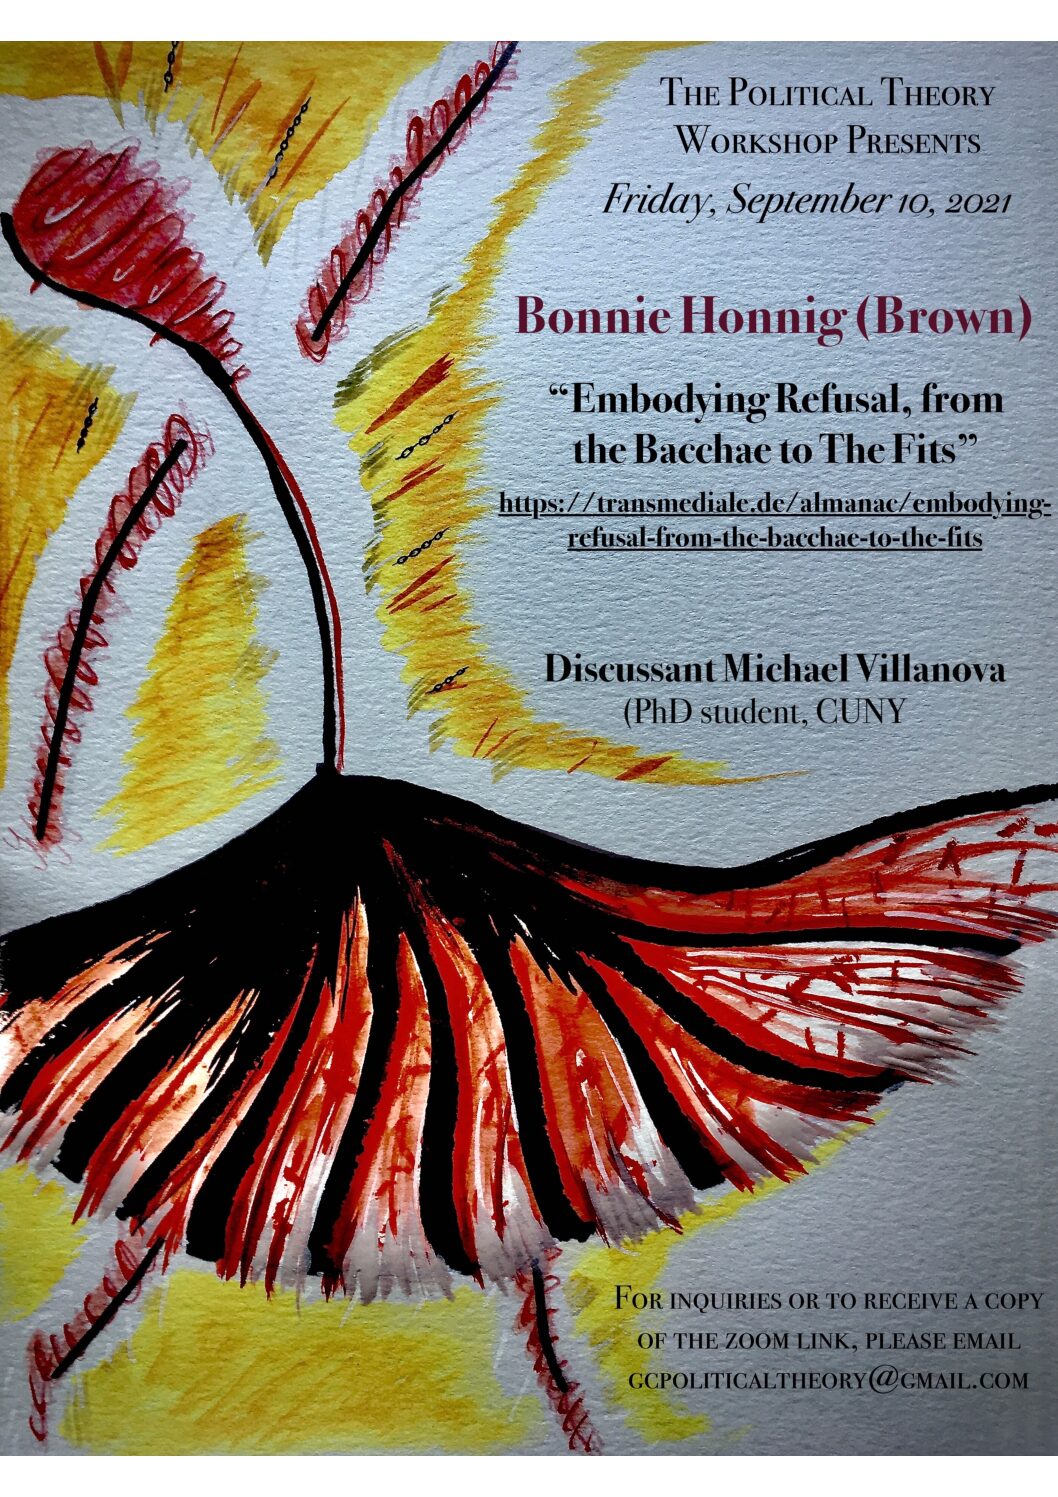 Political Theory Workshop: Bonnie Honig, "Embodying Refusal, from the Bacchae to The Fits," Friday, September 10, 3:00-5:00PM